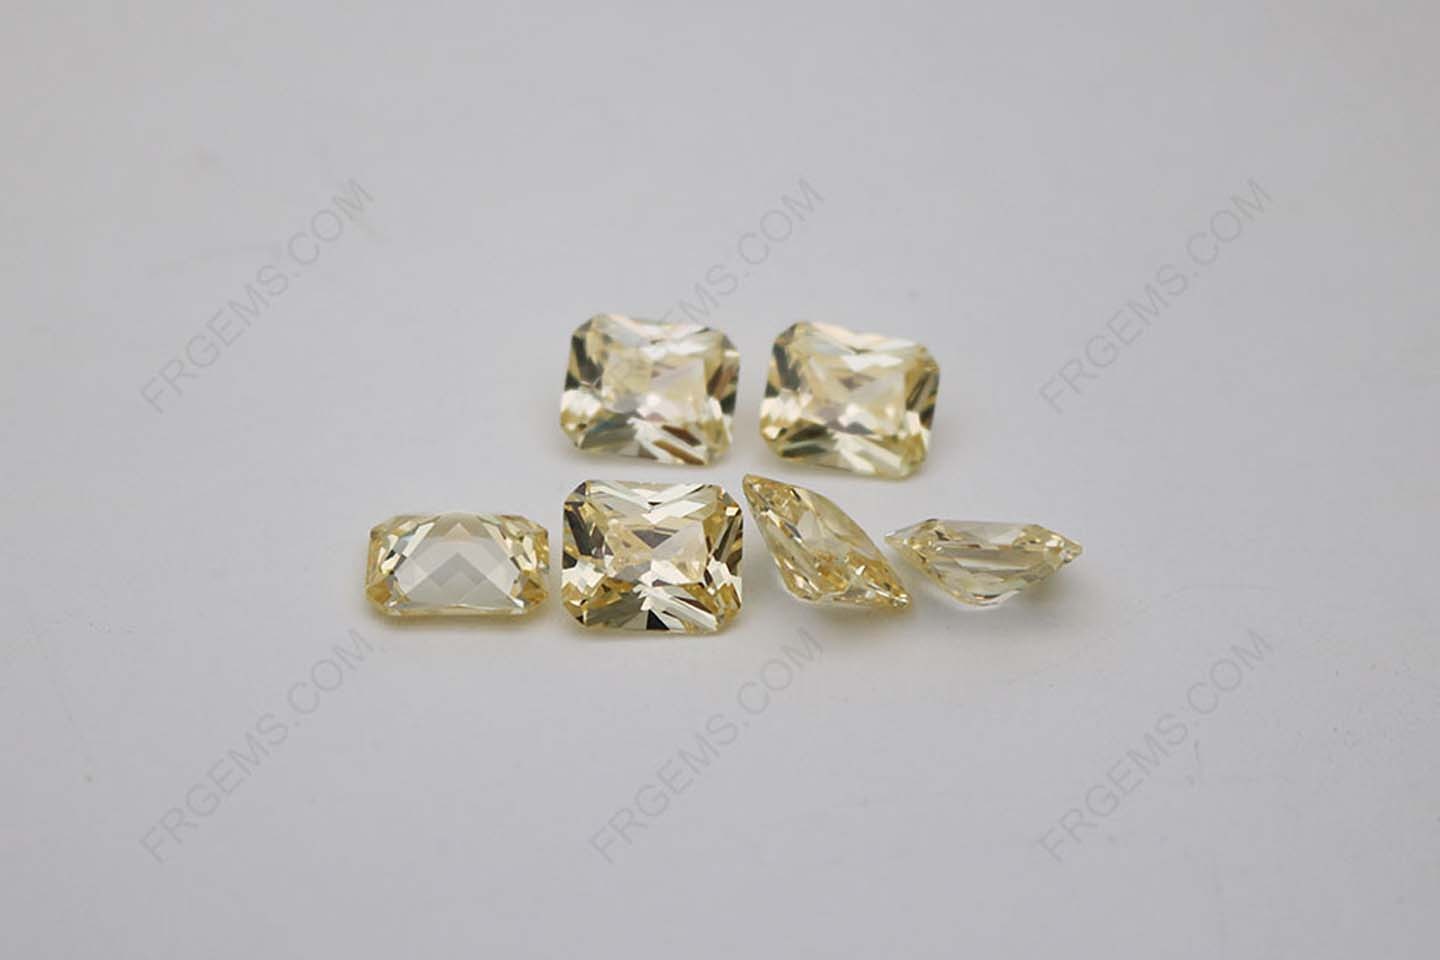 Cubic Zirconia Canary Yellow Octagon Shape Radiant Cut 10x8mm 3A Quality stones CZ06 IMG_2295